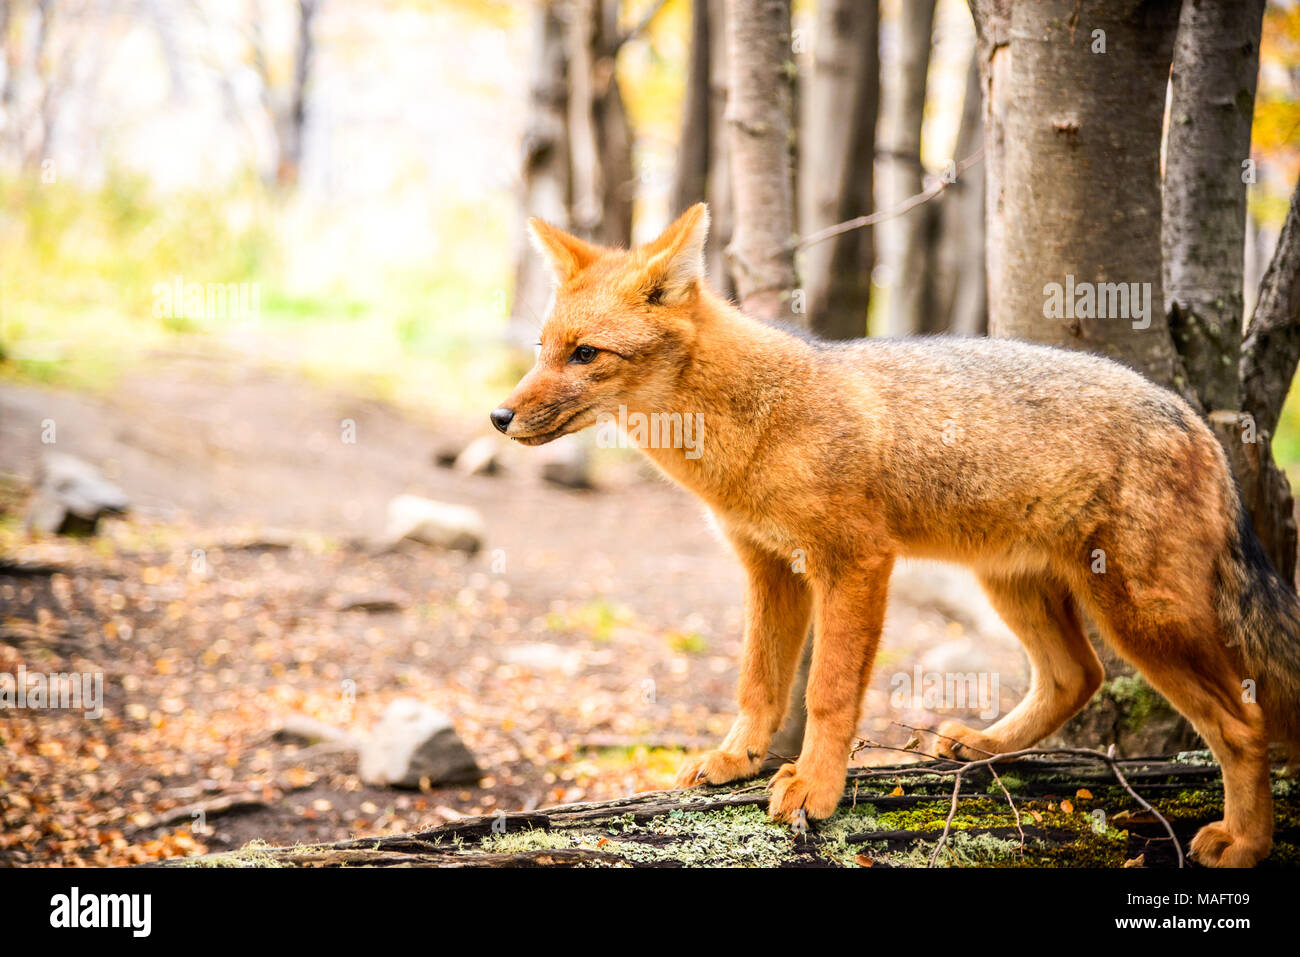 Torres del Paine, Chile - Culpeo, patagonian fox in South America, wild animal in Patagonia. Stock Photo